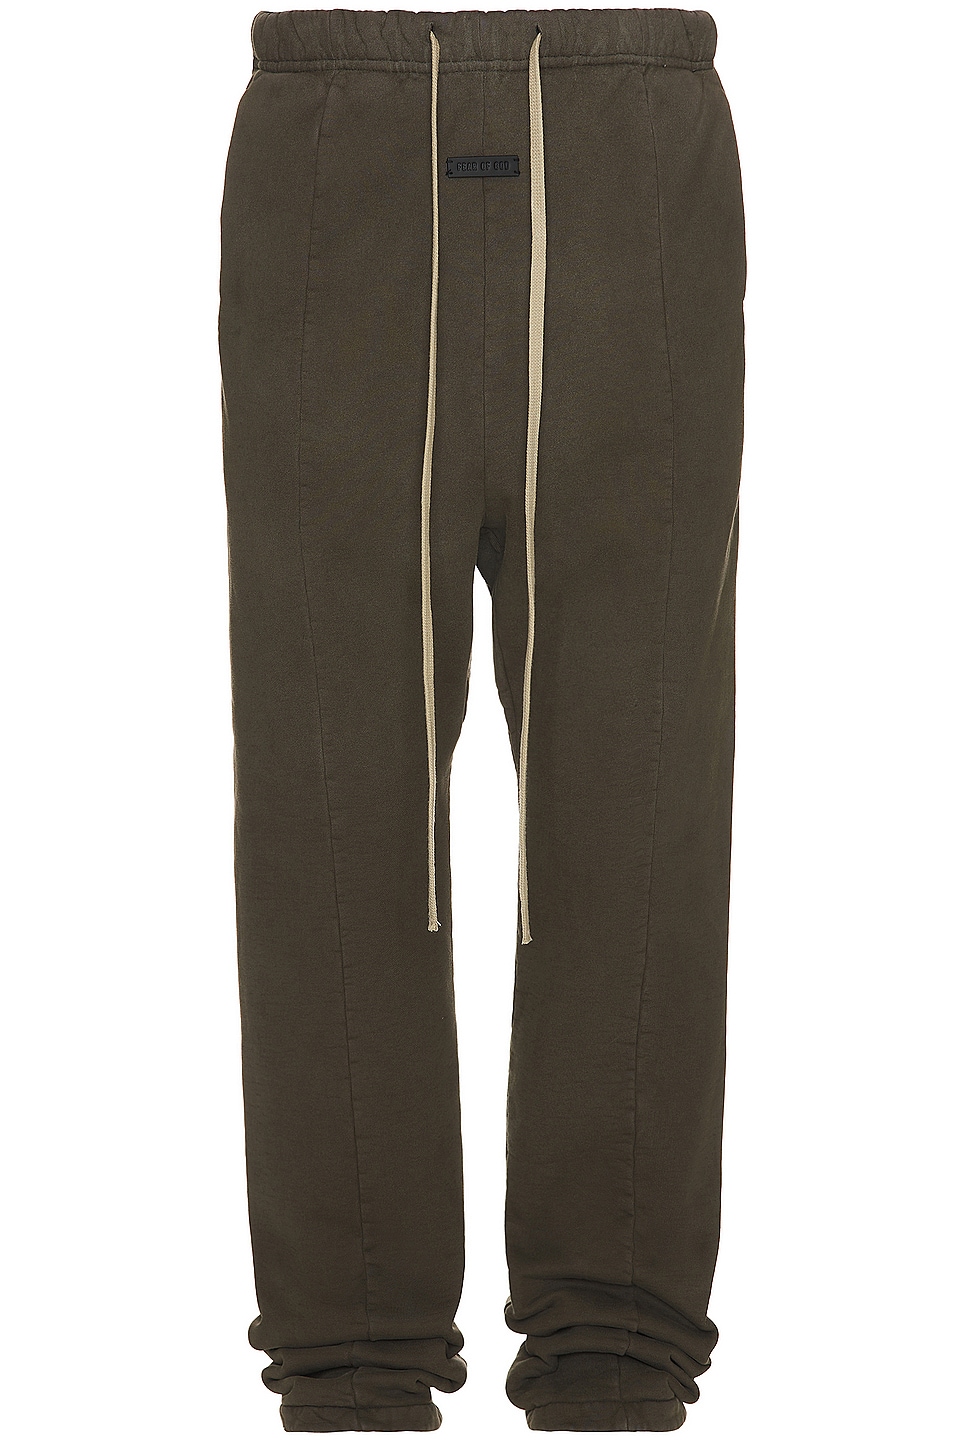 Image 1 of Fear of God Forum Sweatpant in Olive